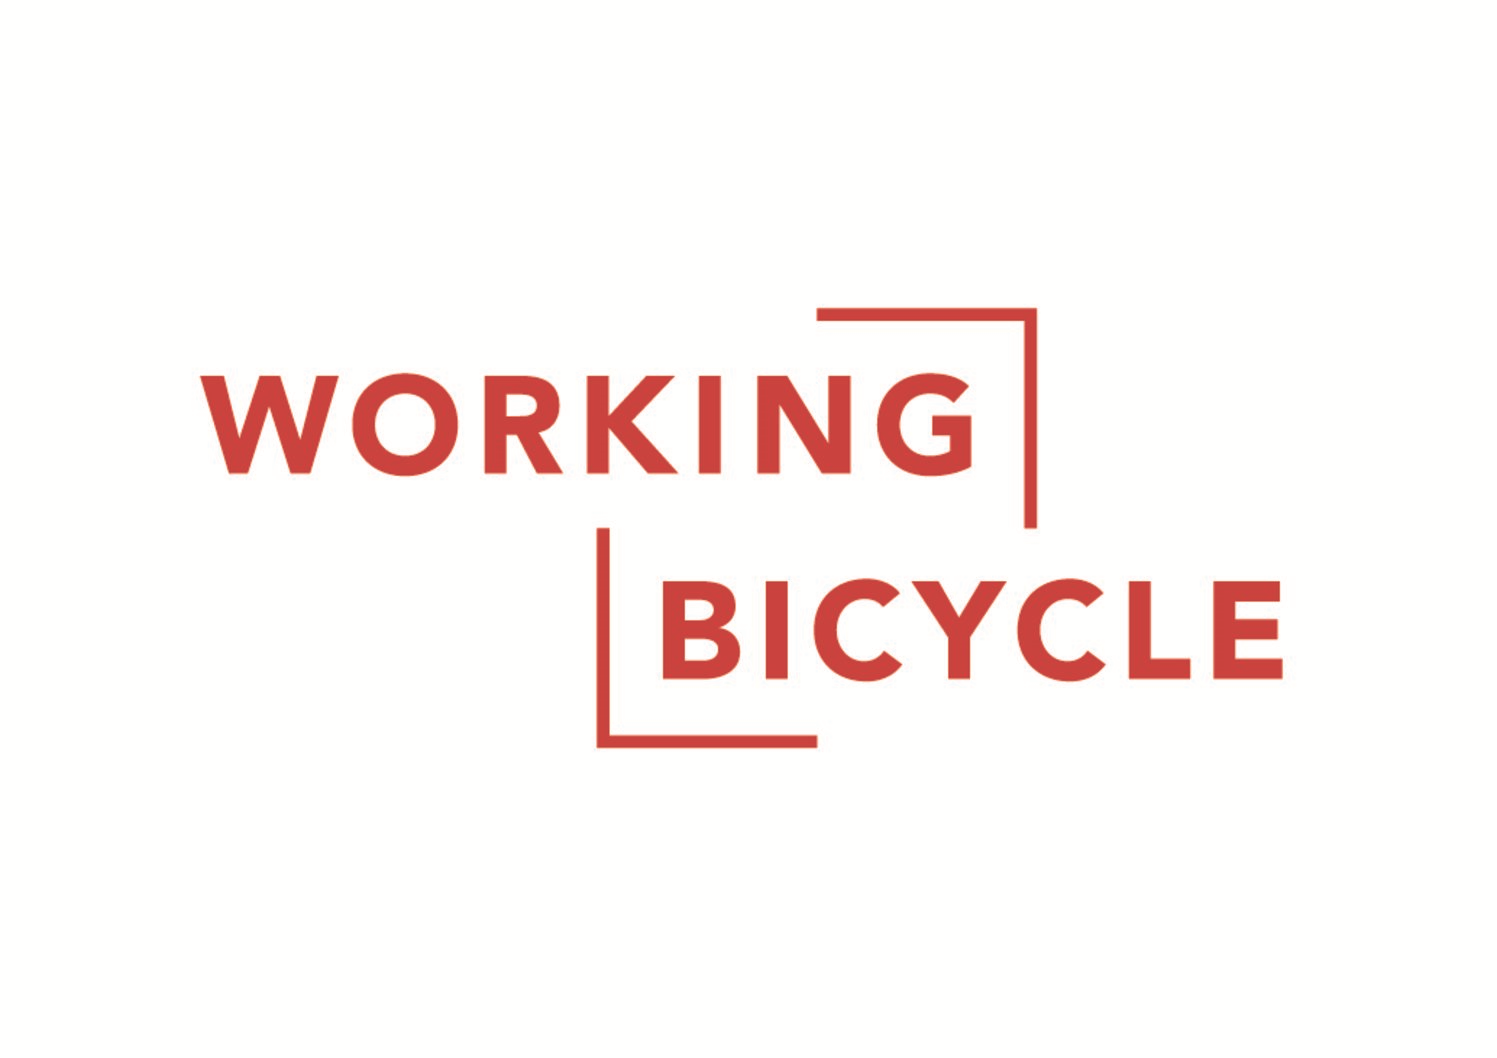 Working Bicycle